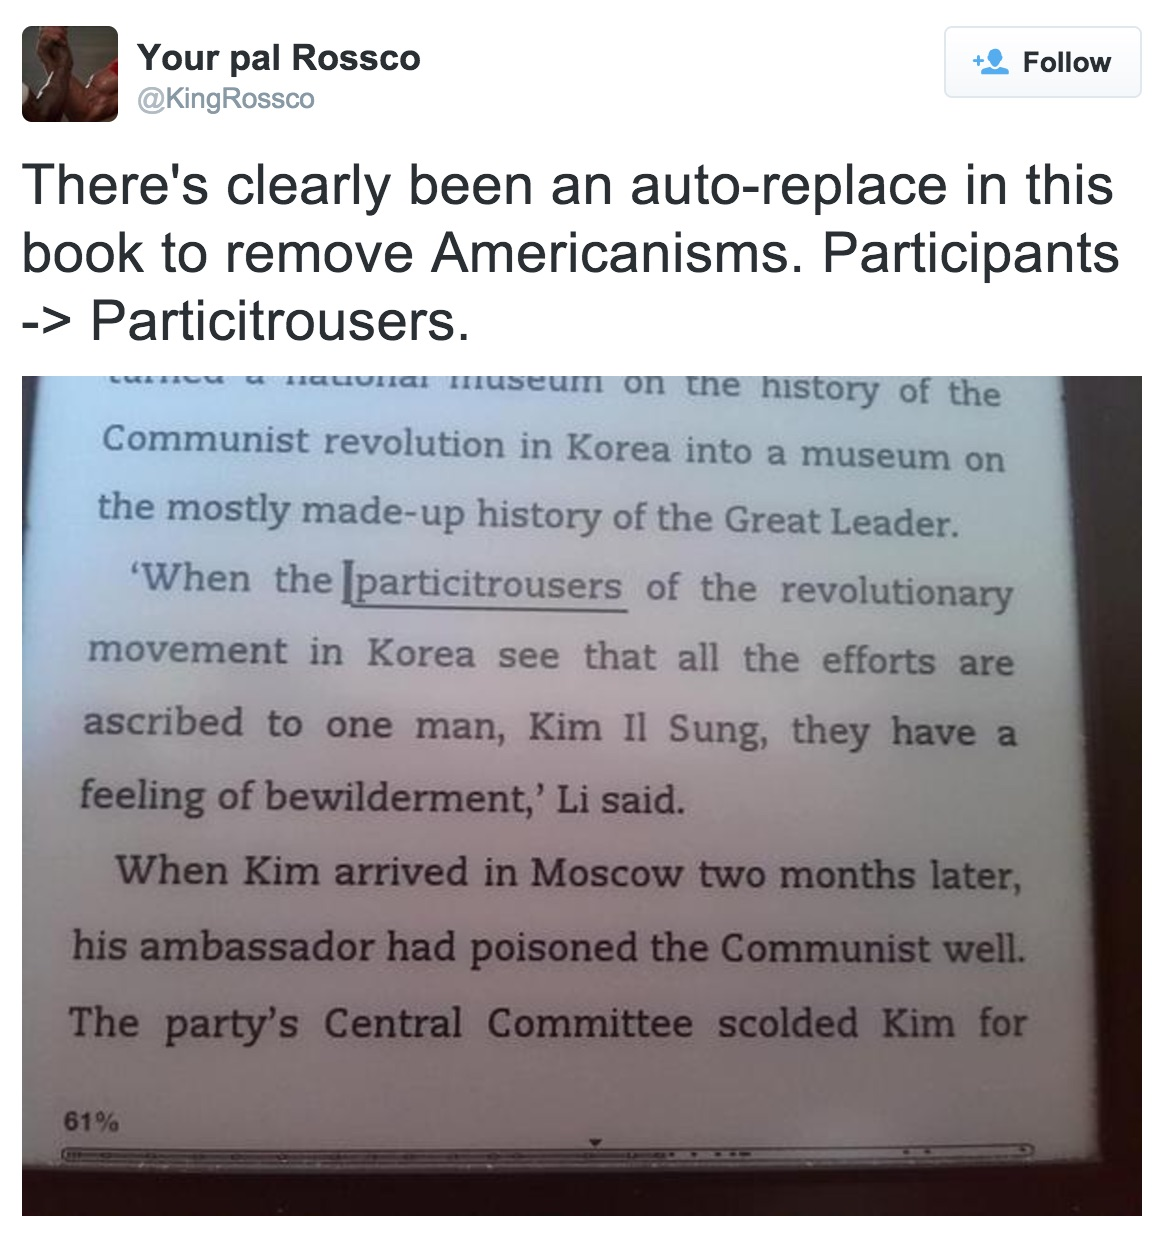 tweet di @KingRossco “There’s clearly been an auto-replace in this book to remove Americanisms. Participants -> Particitrousers.”. Immagine con esempio: “When the particitrousers of the revolutionary movement in Korea…”